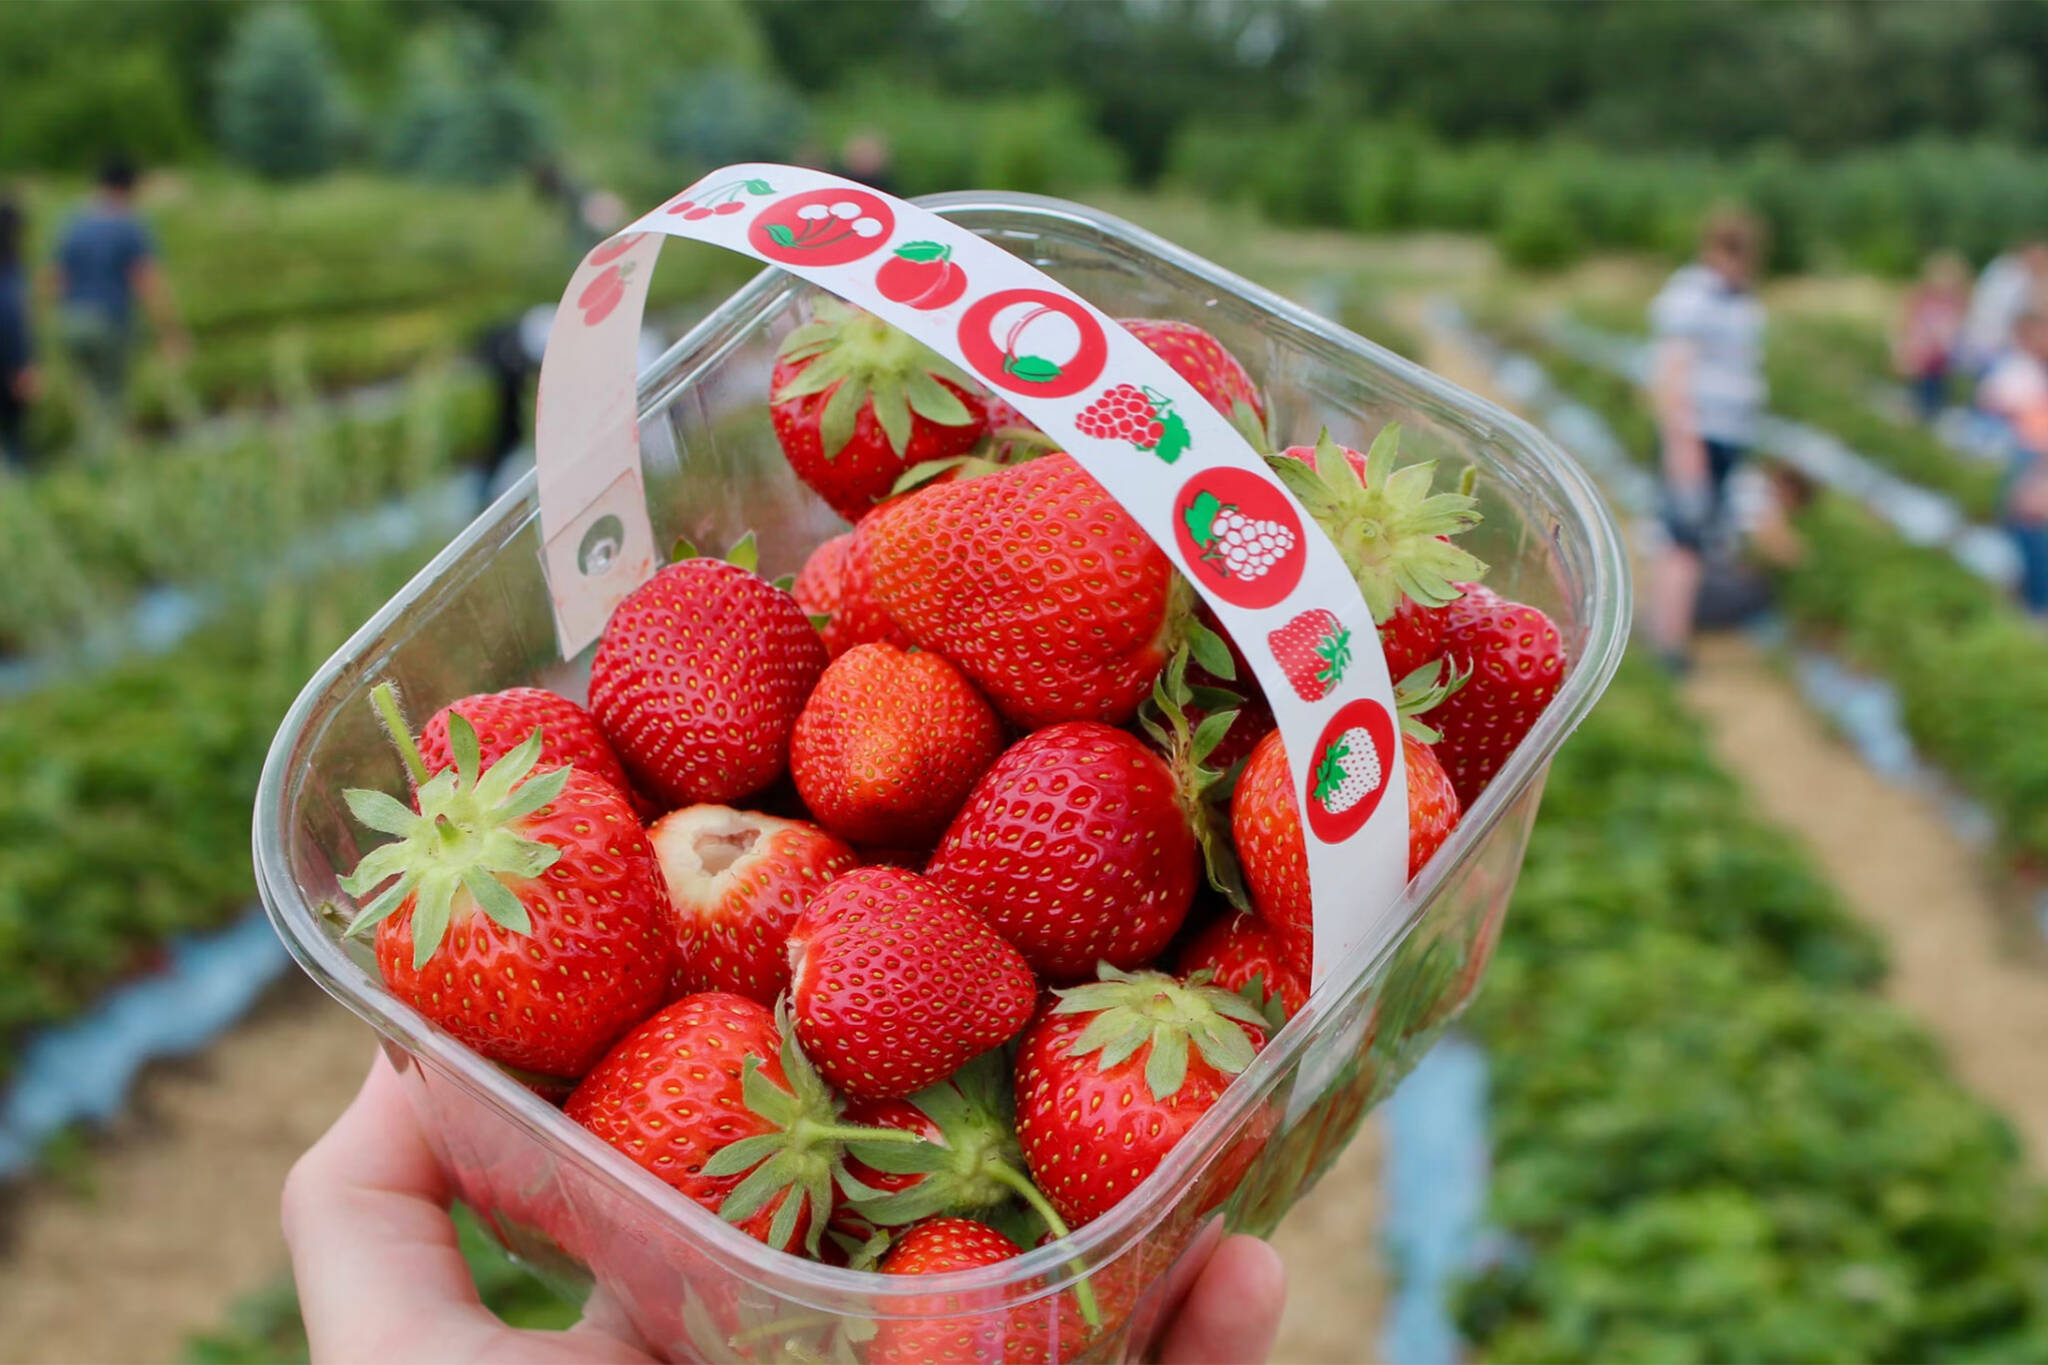 2022522 Strawberries 222 ?w=2048&cmd=resize Then Crop&height=1365&quality=70